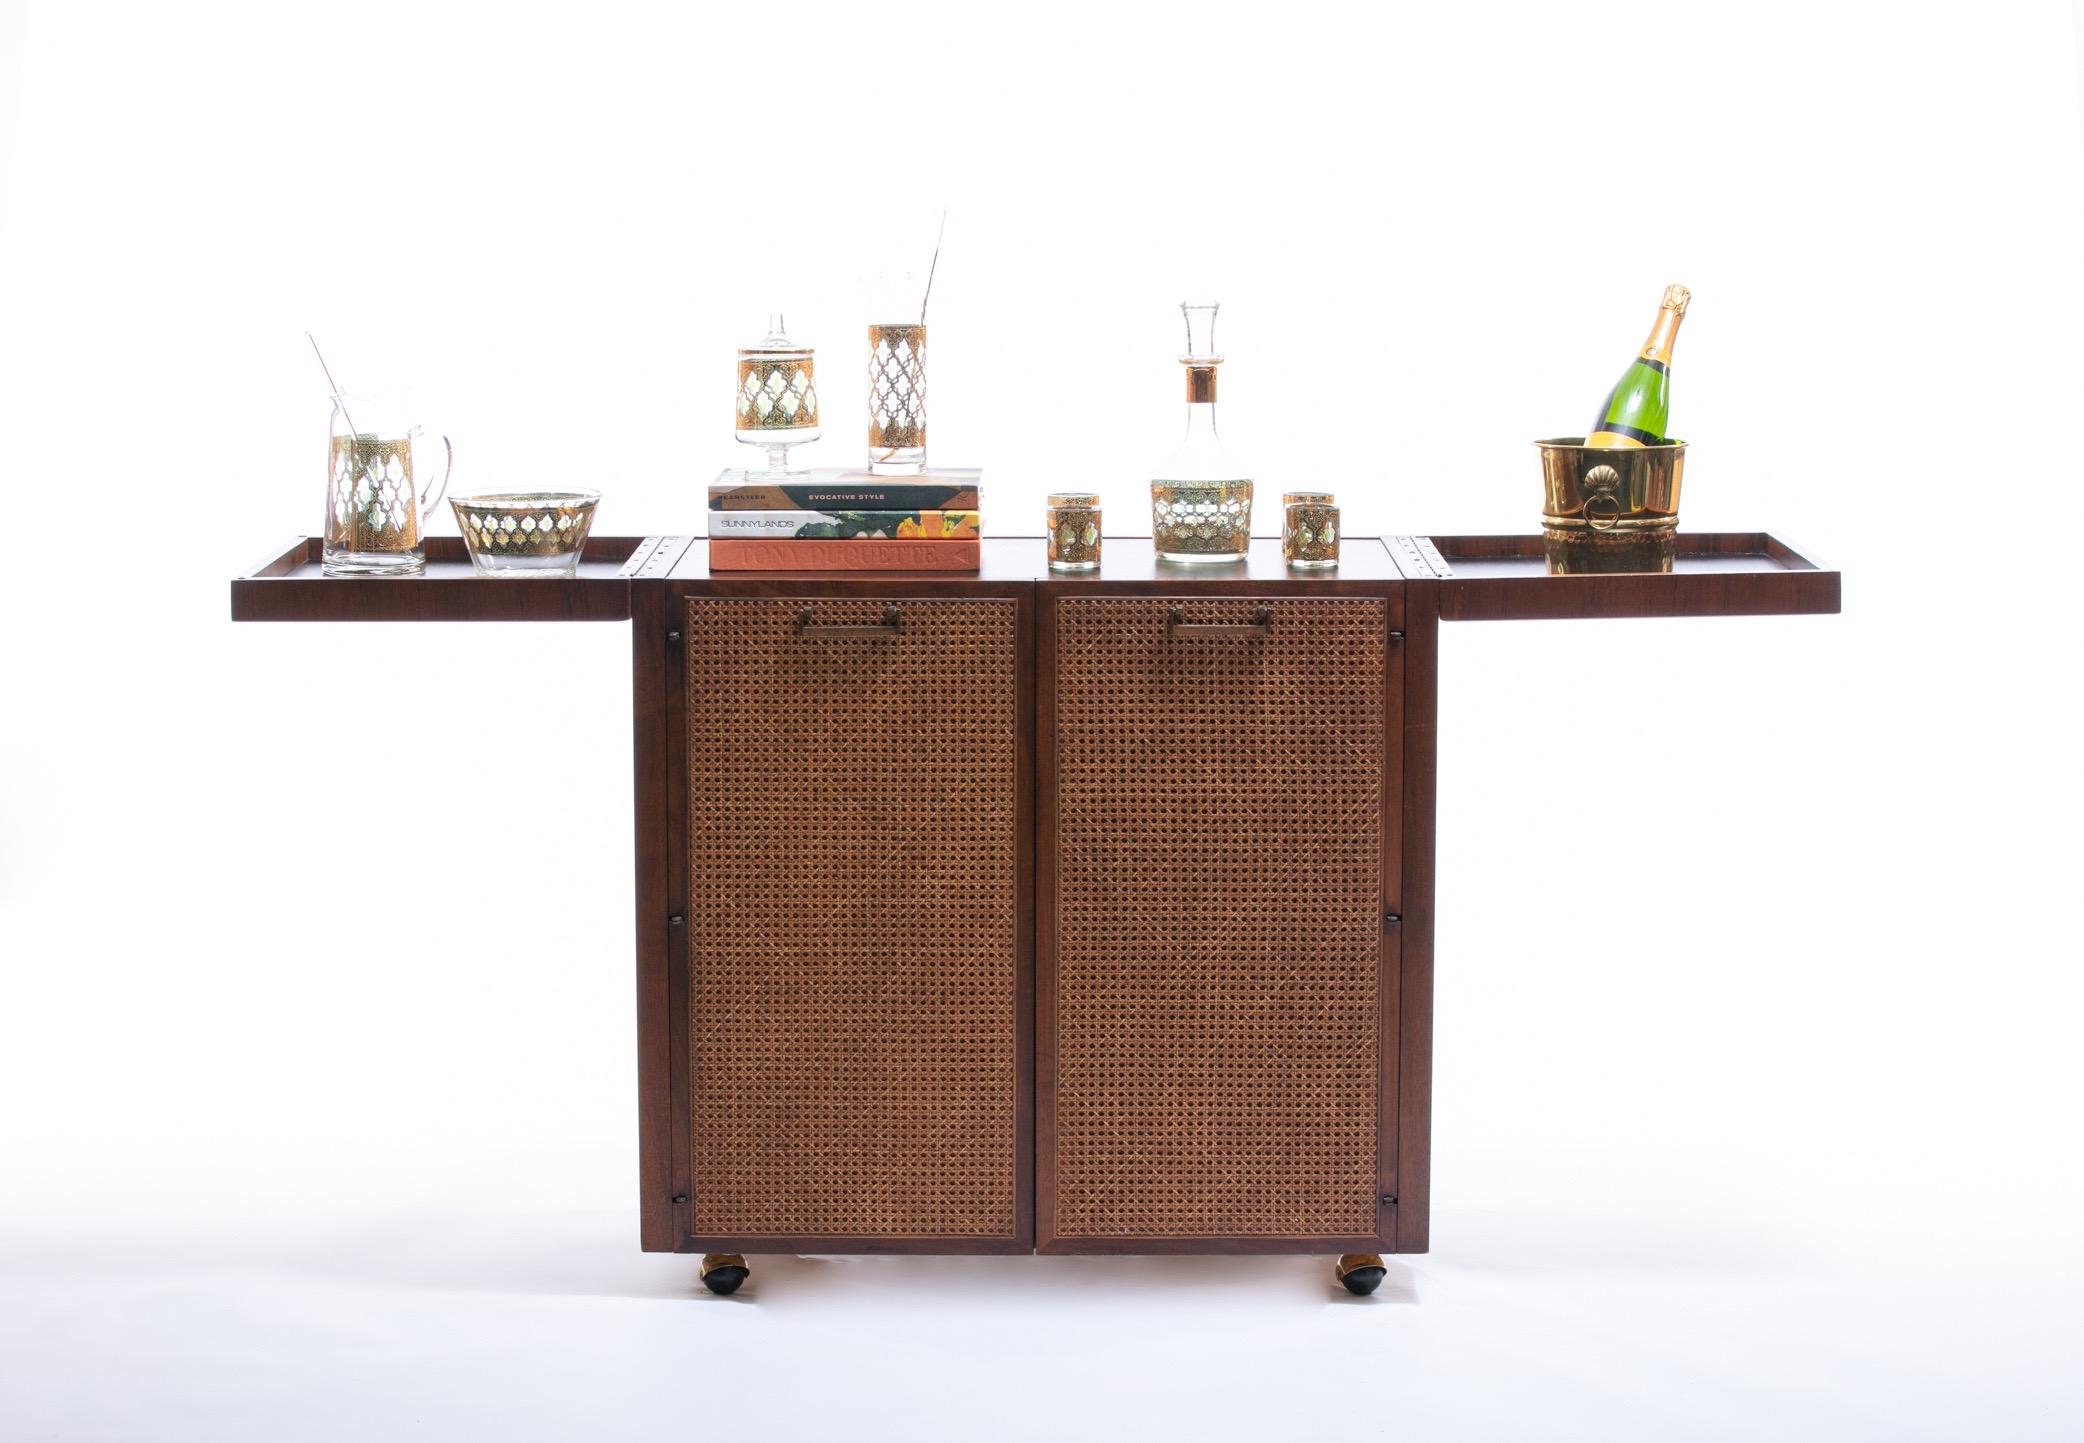 Classic Mid-Century Modern design by Jack Cartwright for Founders featuring a rosewood case, cane-front doors, and brass hardware. This piece was sourced from its original one-owner home and has not moved since new. We styled this bar cart to help